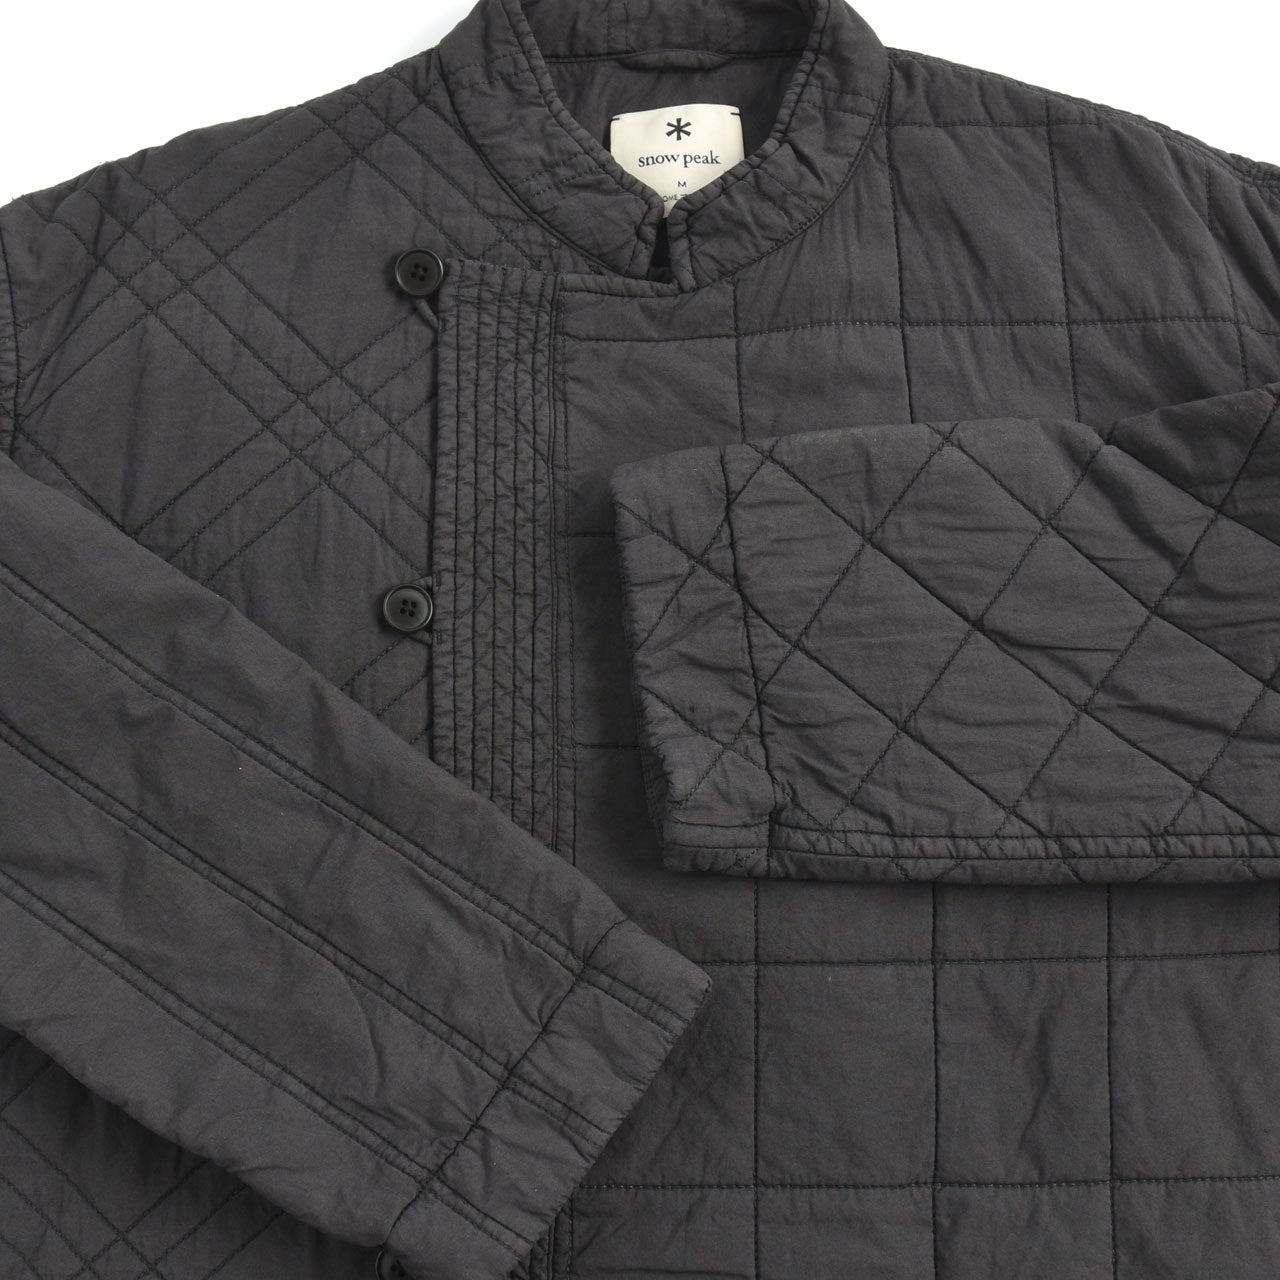 Snow Peak Upcycled Quilted Walking Coat